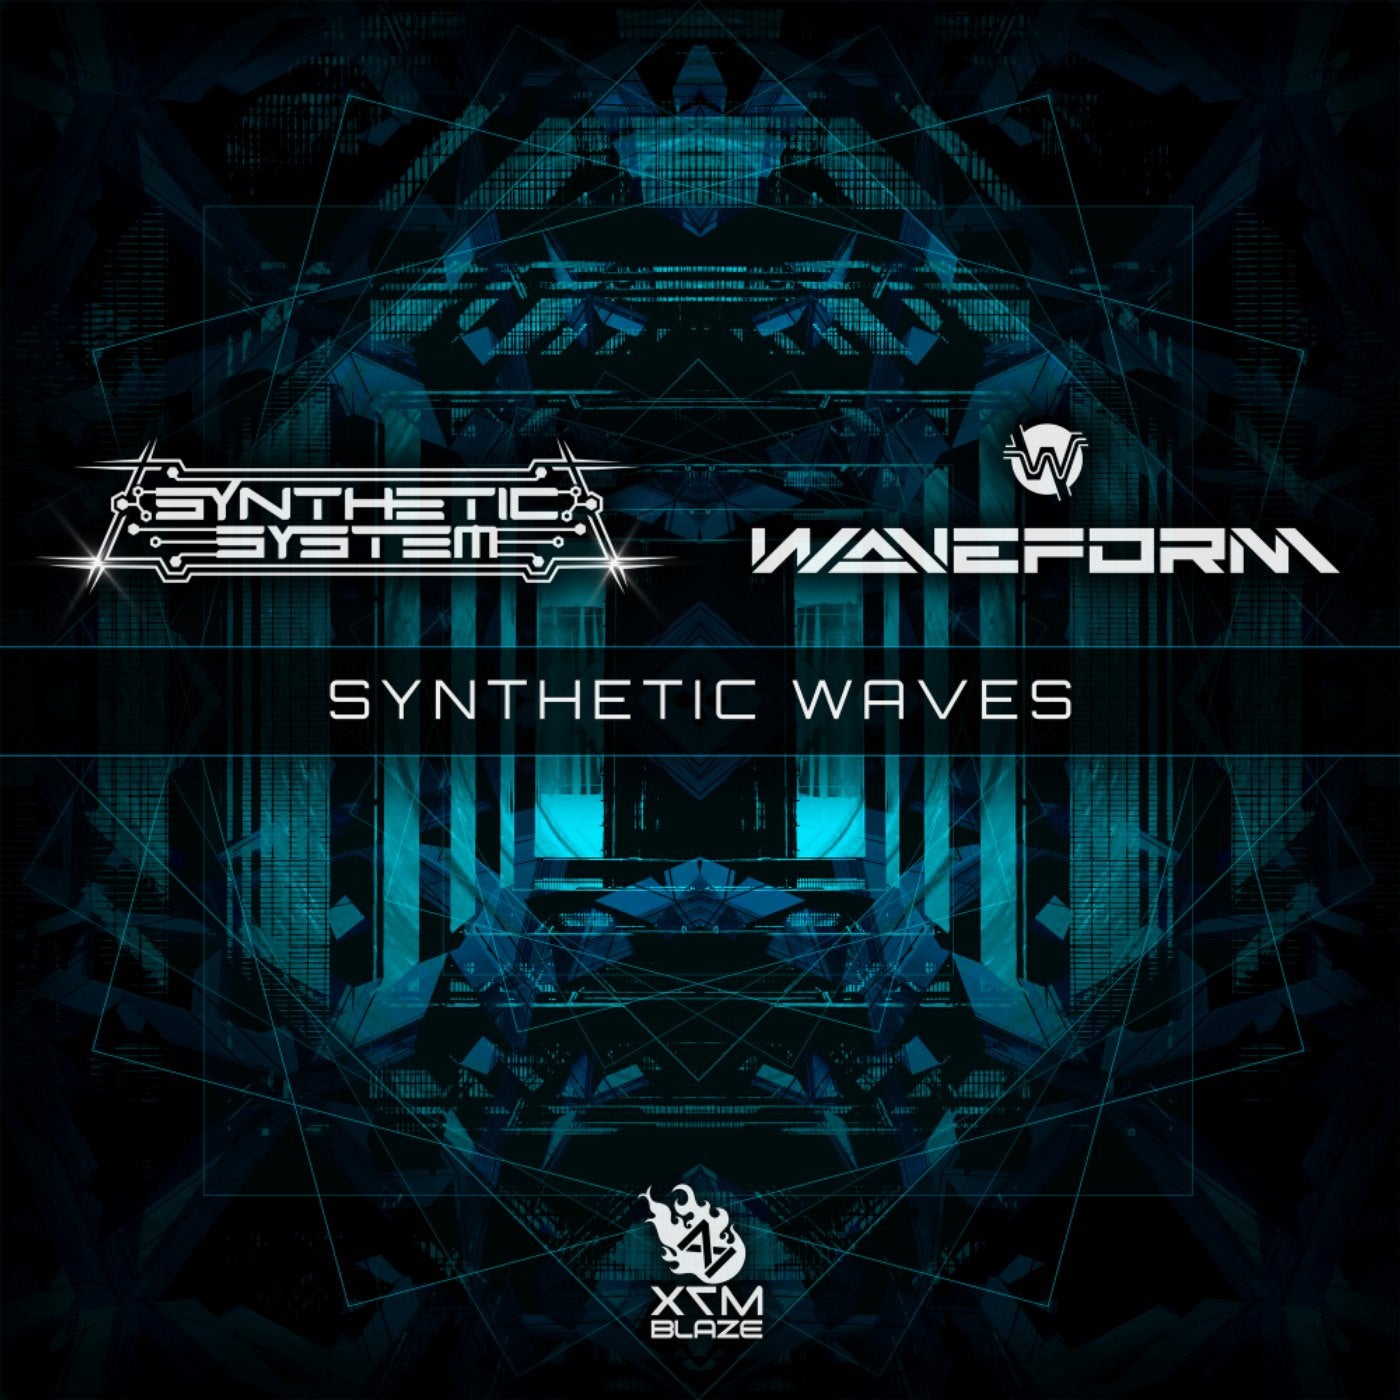 Synthetic Waves